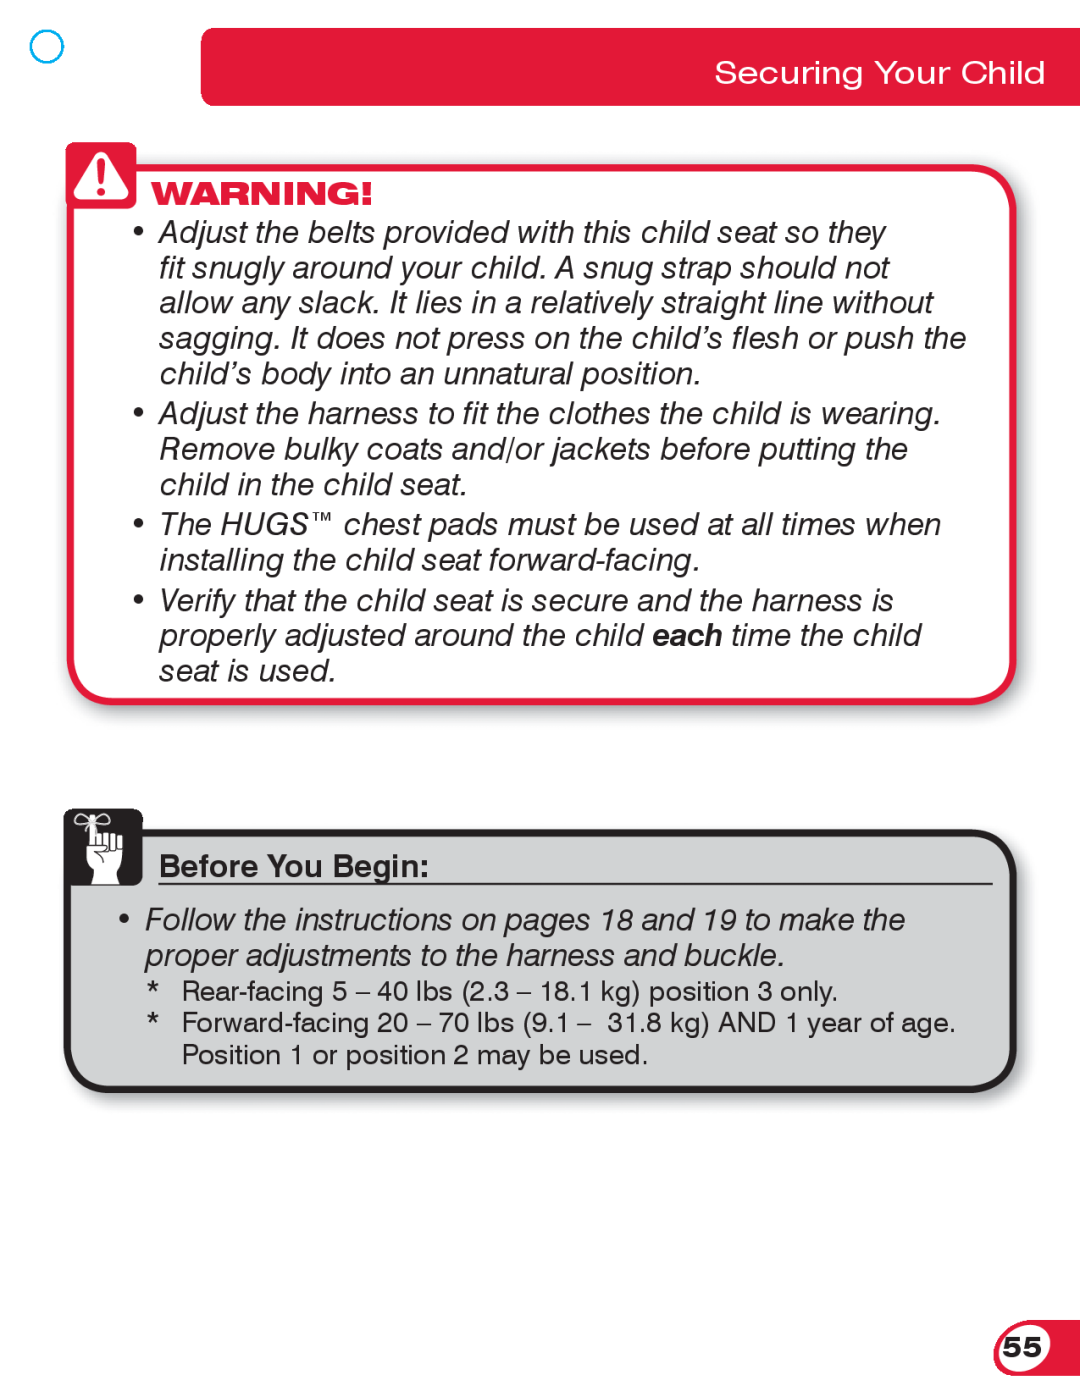 Britax 70 CS manual Securing Your Child, Before You Begin 